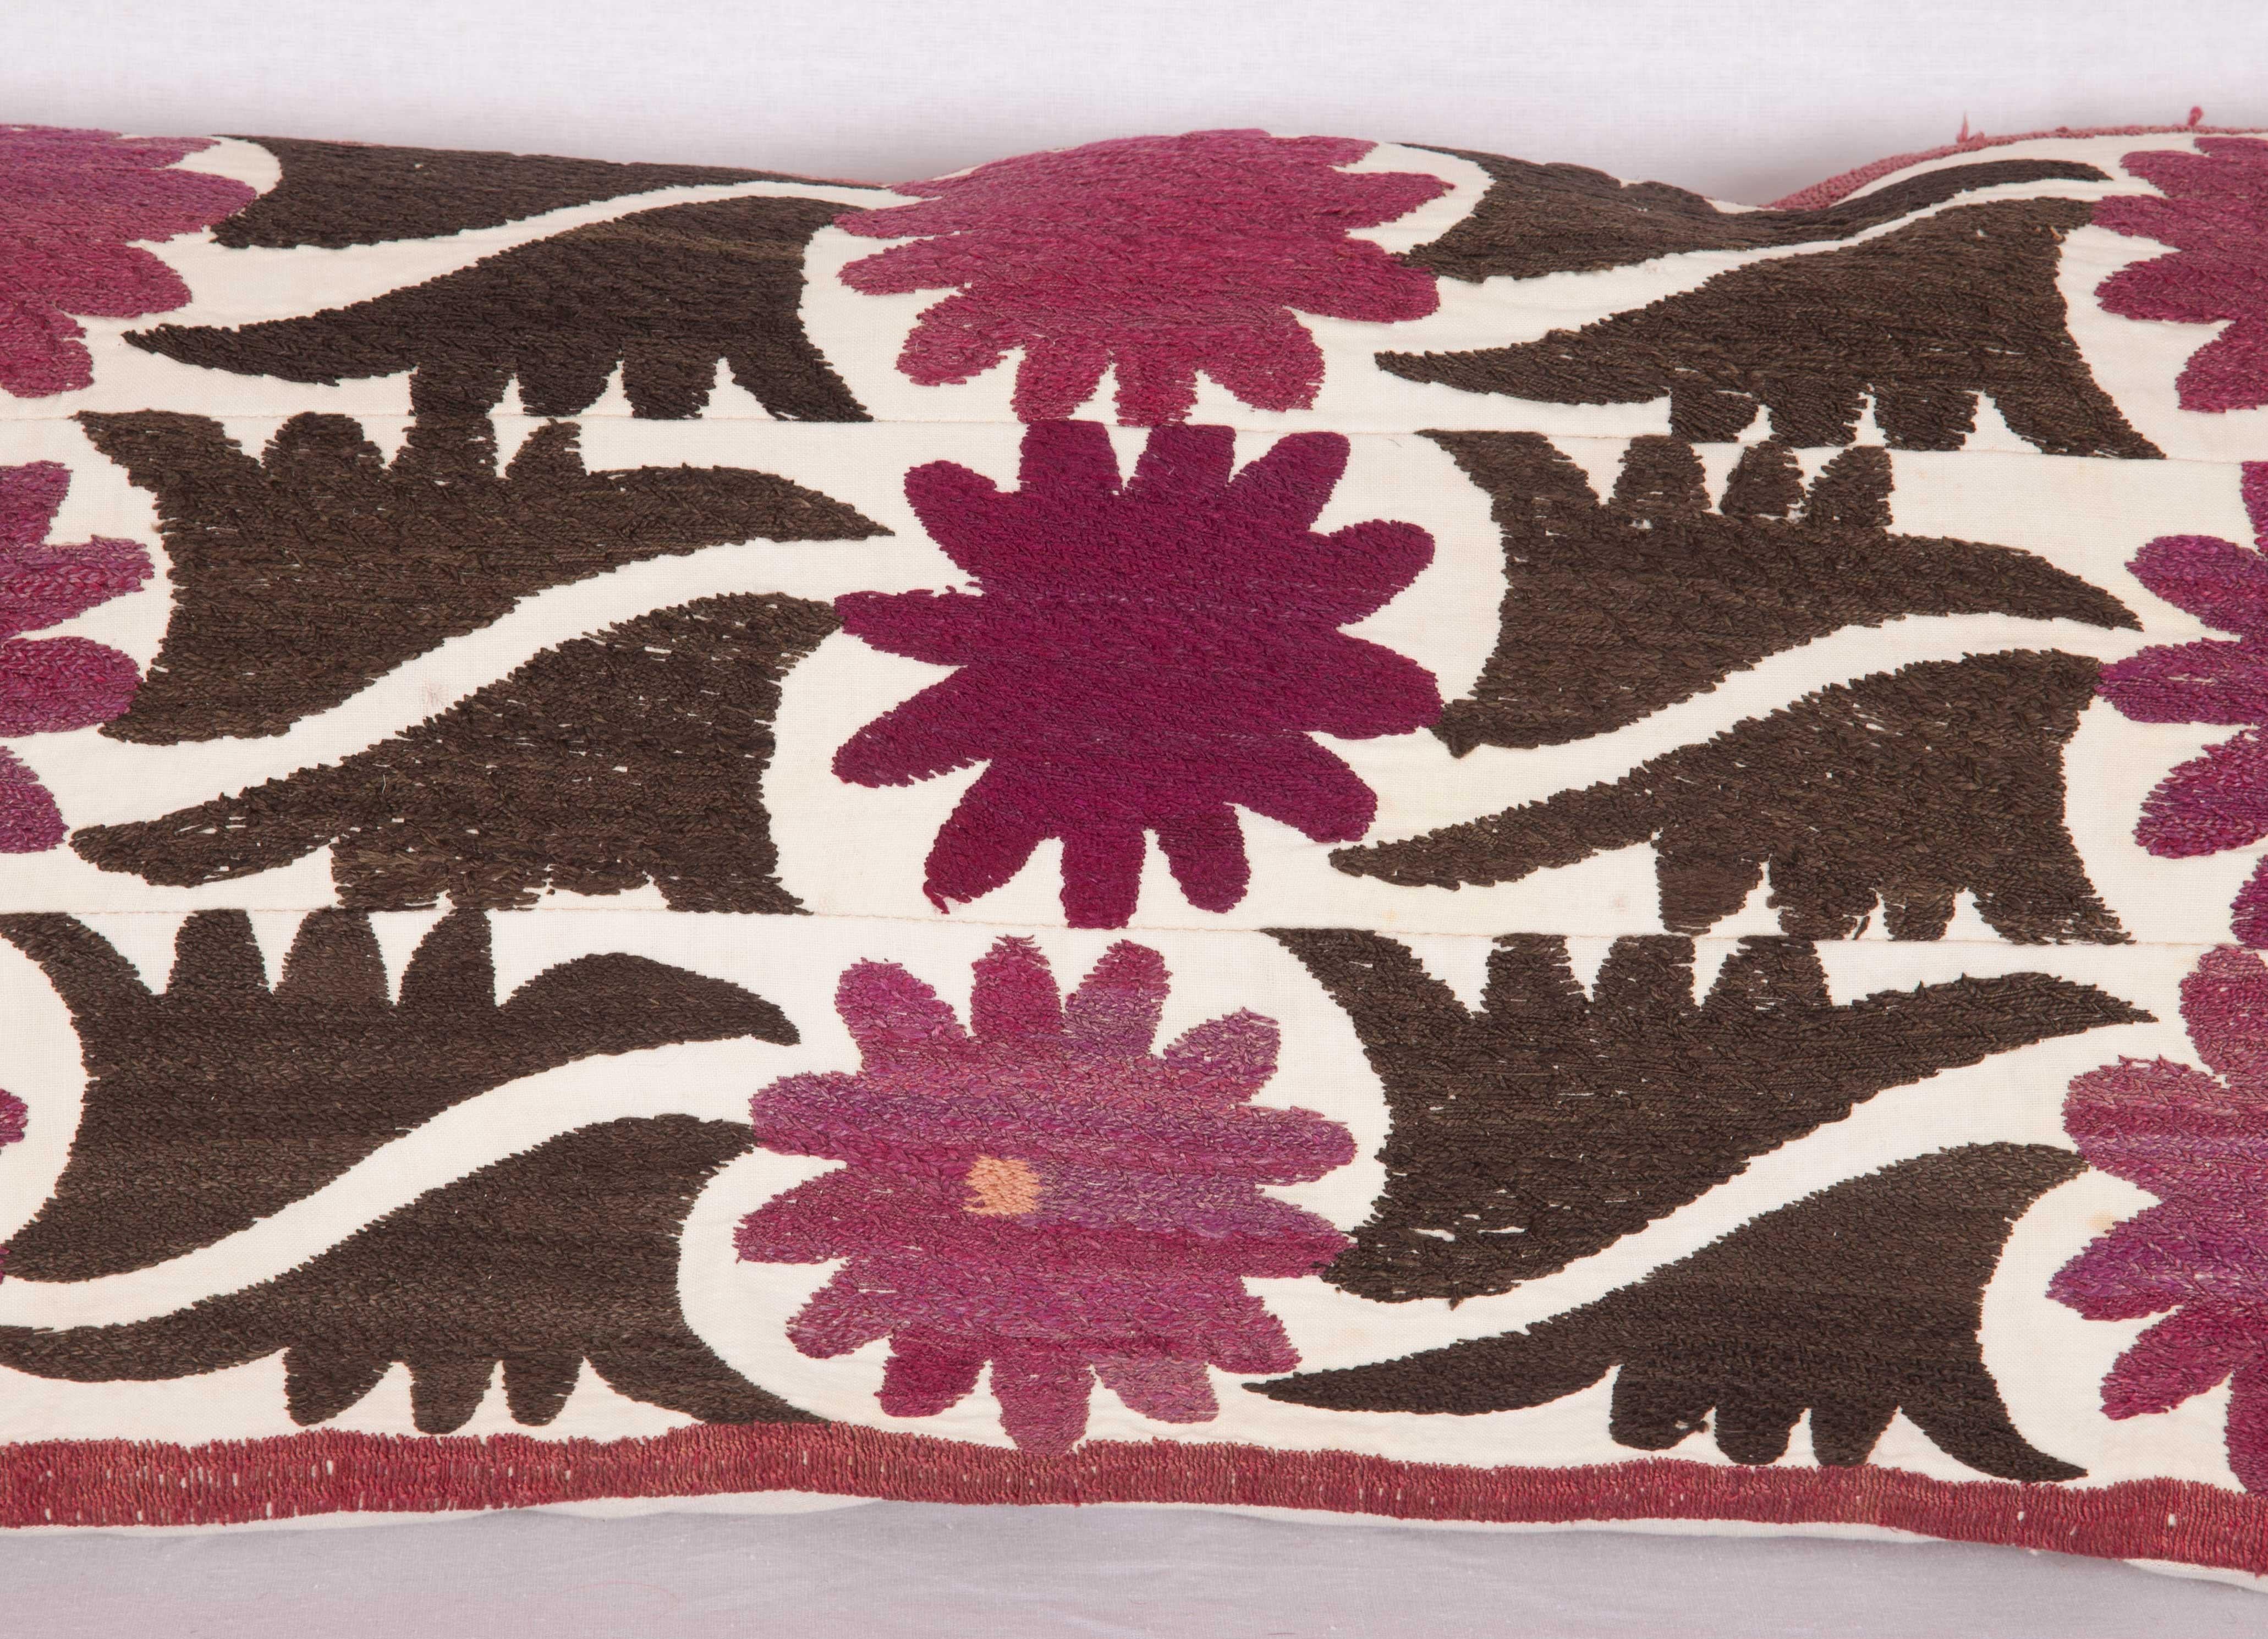 Embroidered Pillow Case Fashioned from Early 20th Century Suzani from Samarkand Uzbekistan